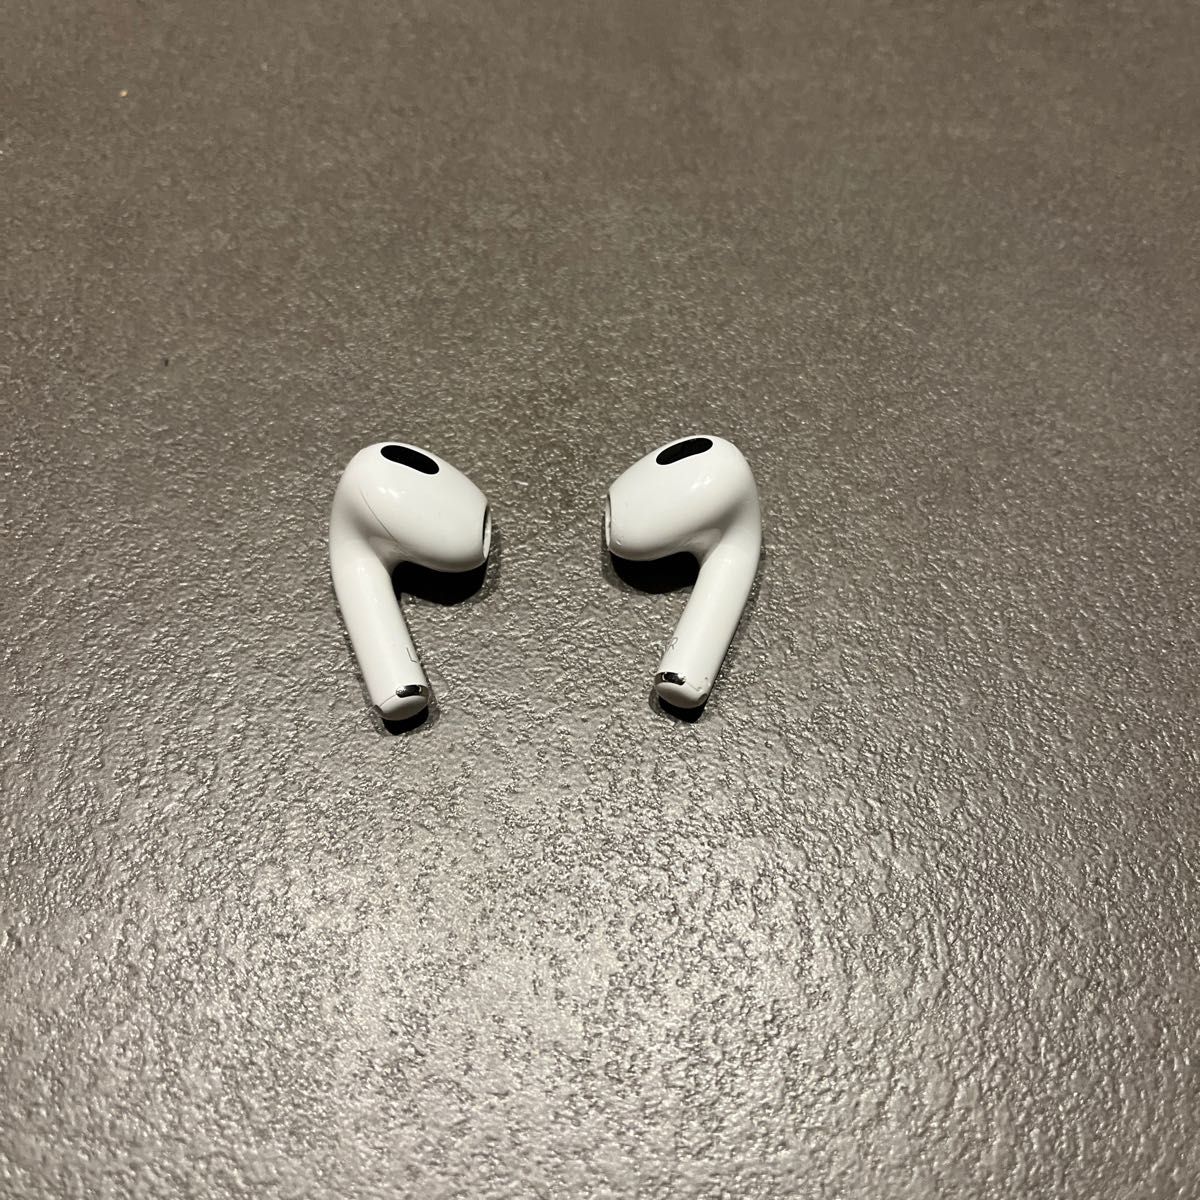 Apple Airpods (第3世代) MME73J/A オーディオ機器 イヤホン